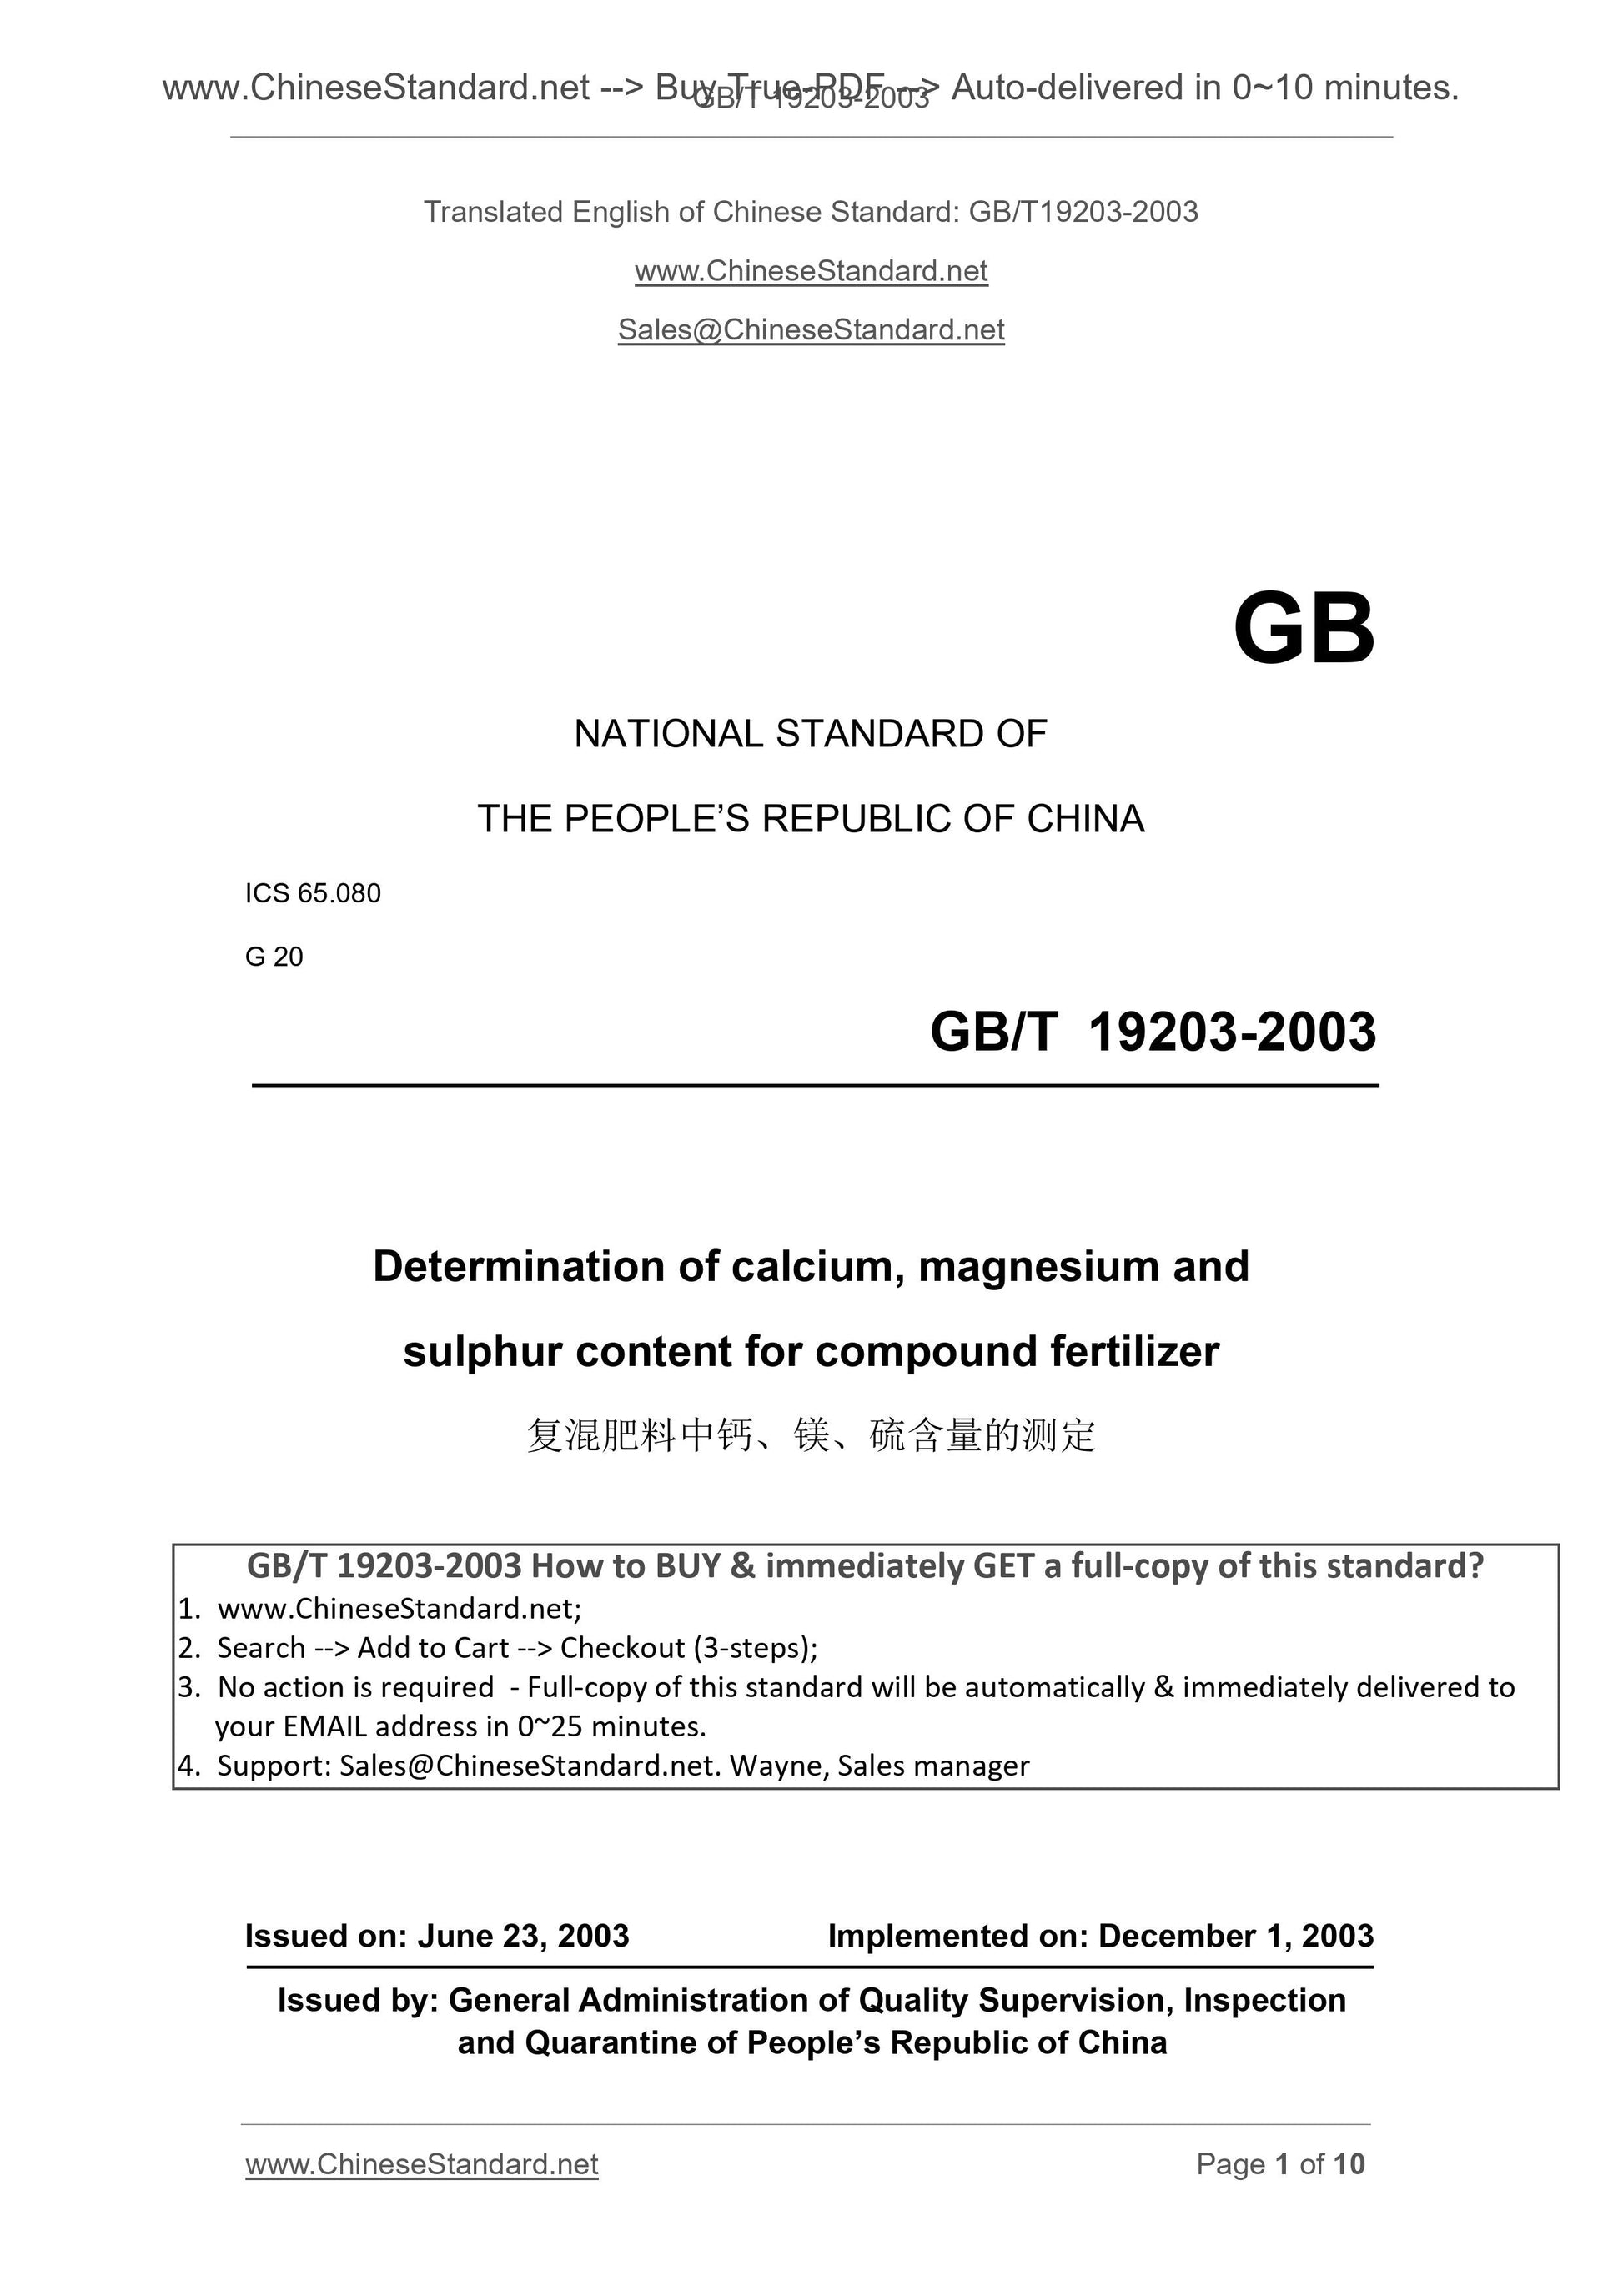 GB/T 19203-2003 Page 1